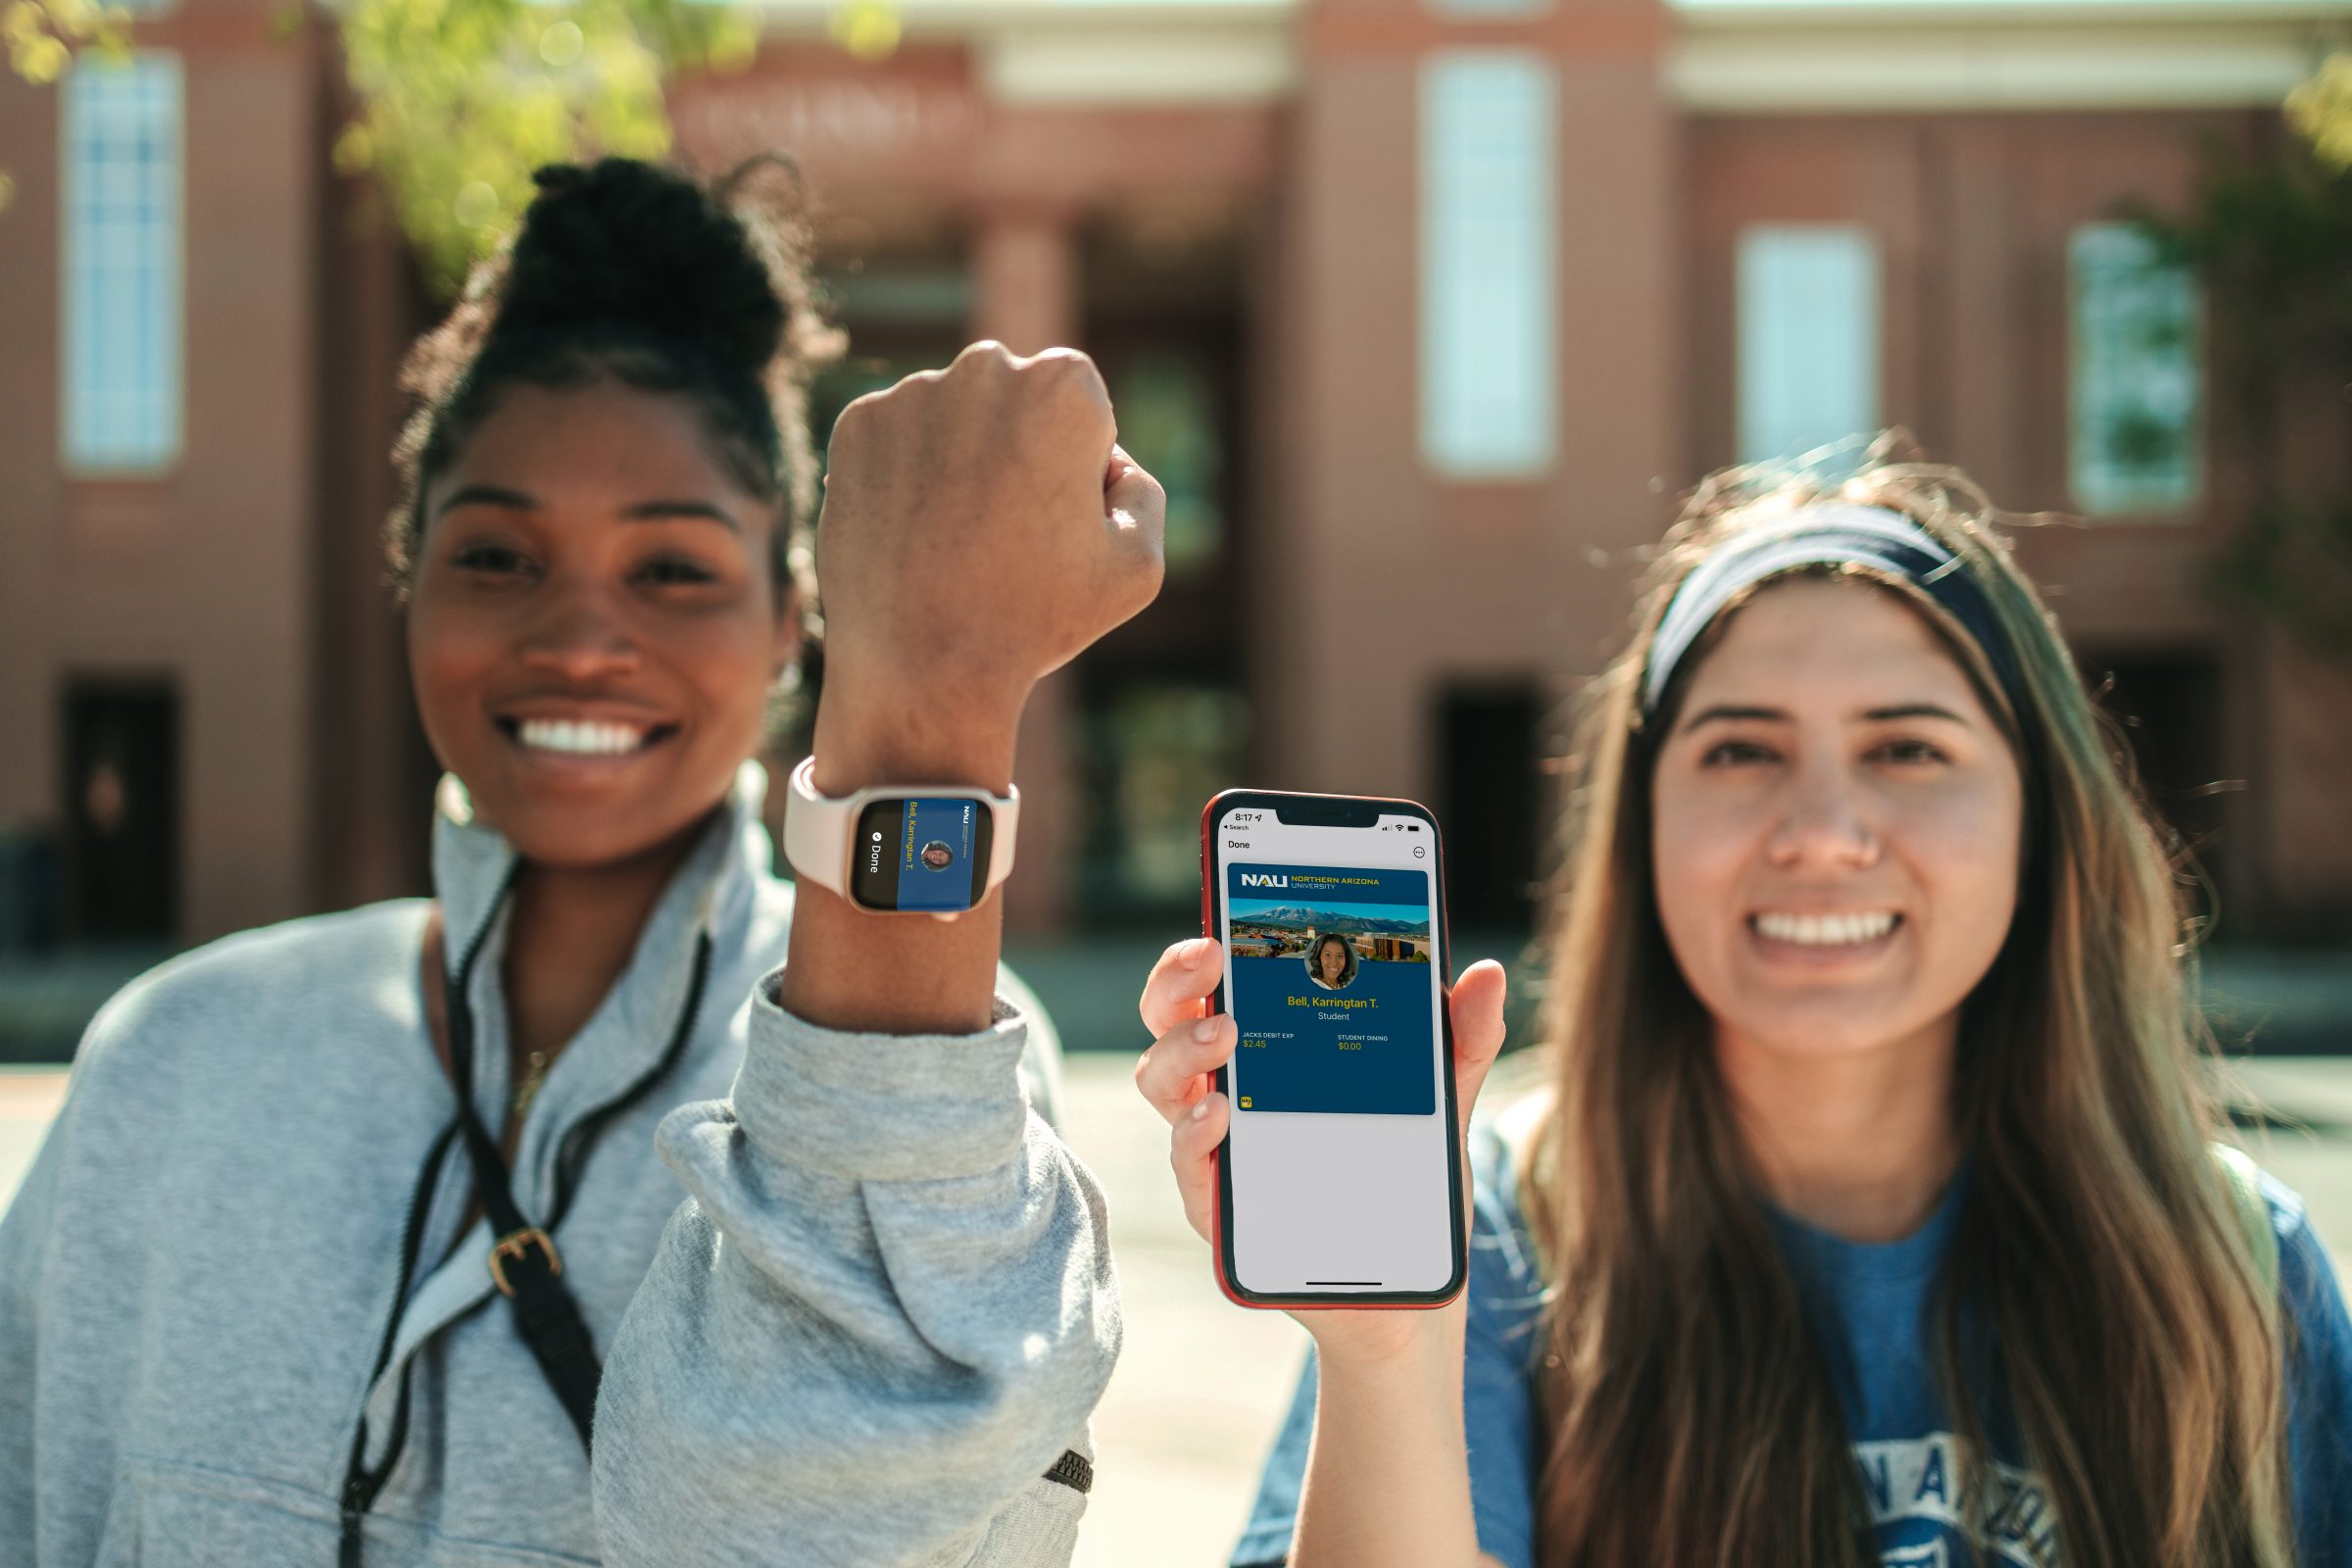 Two students with an Apple device and Apple watch